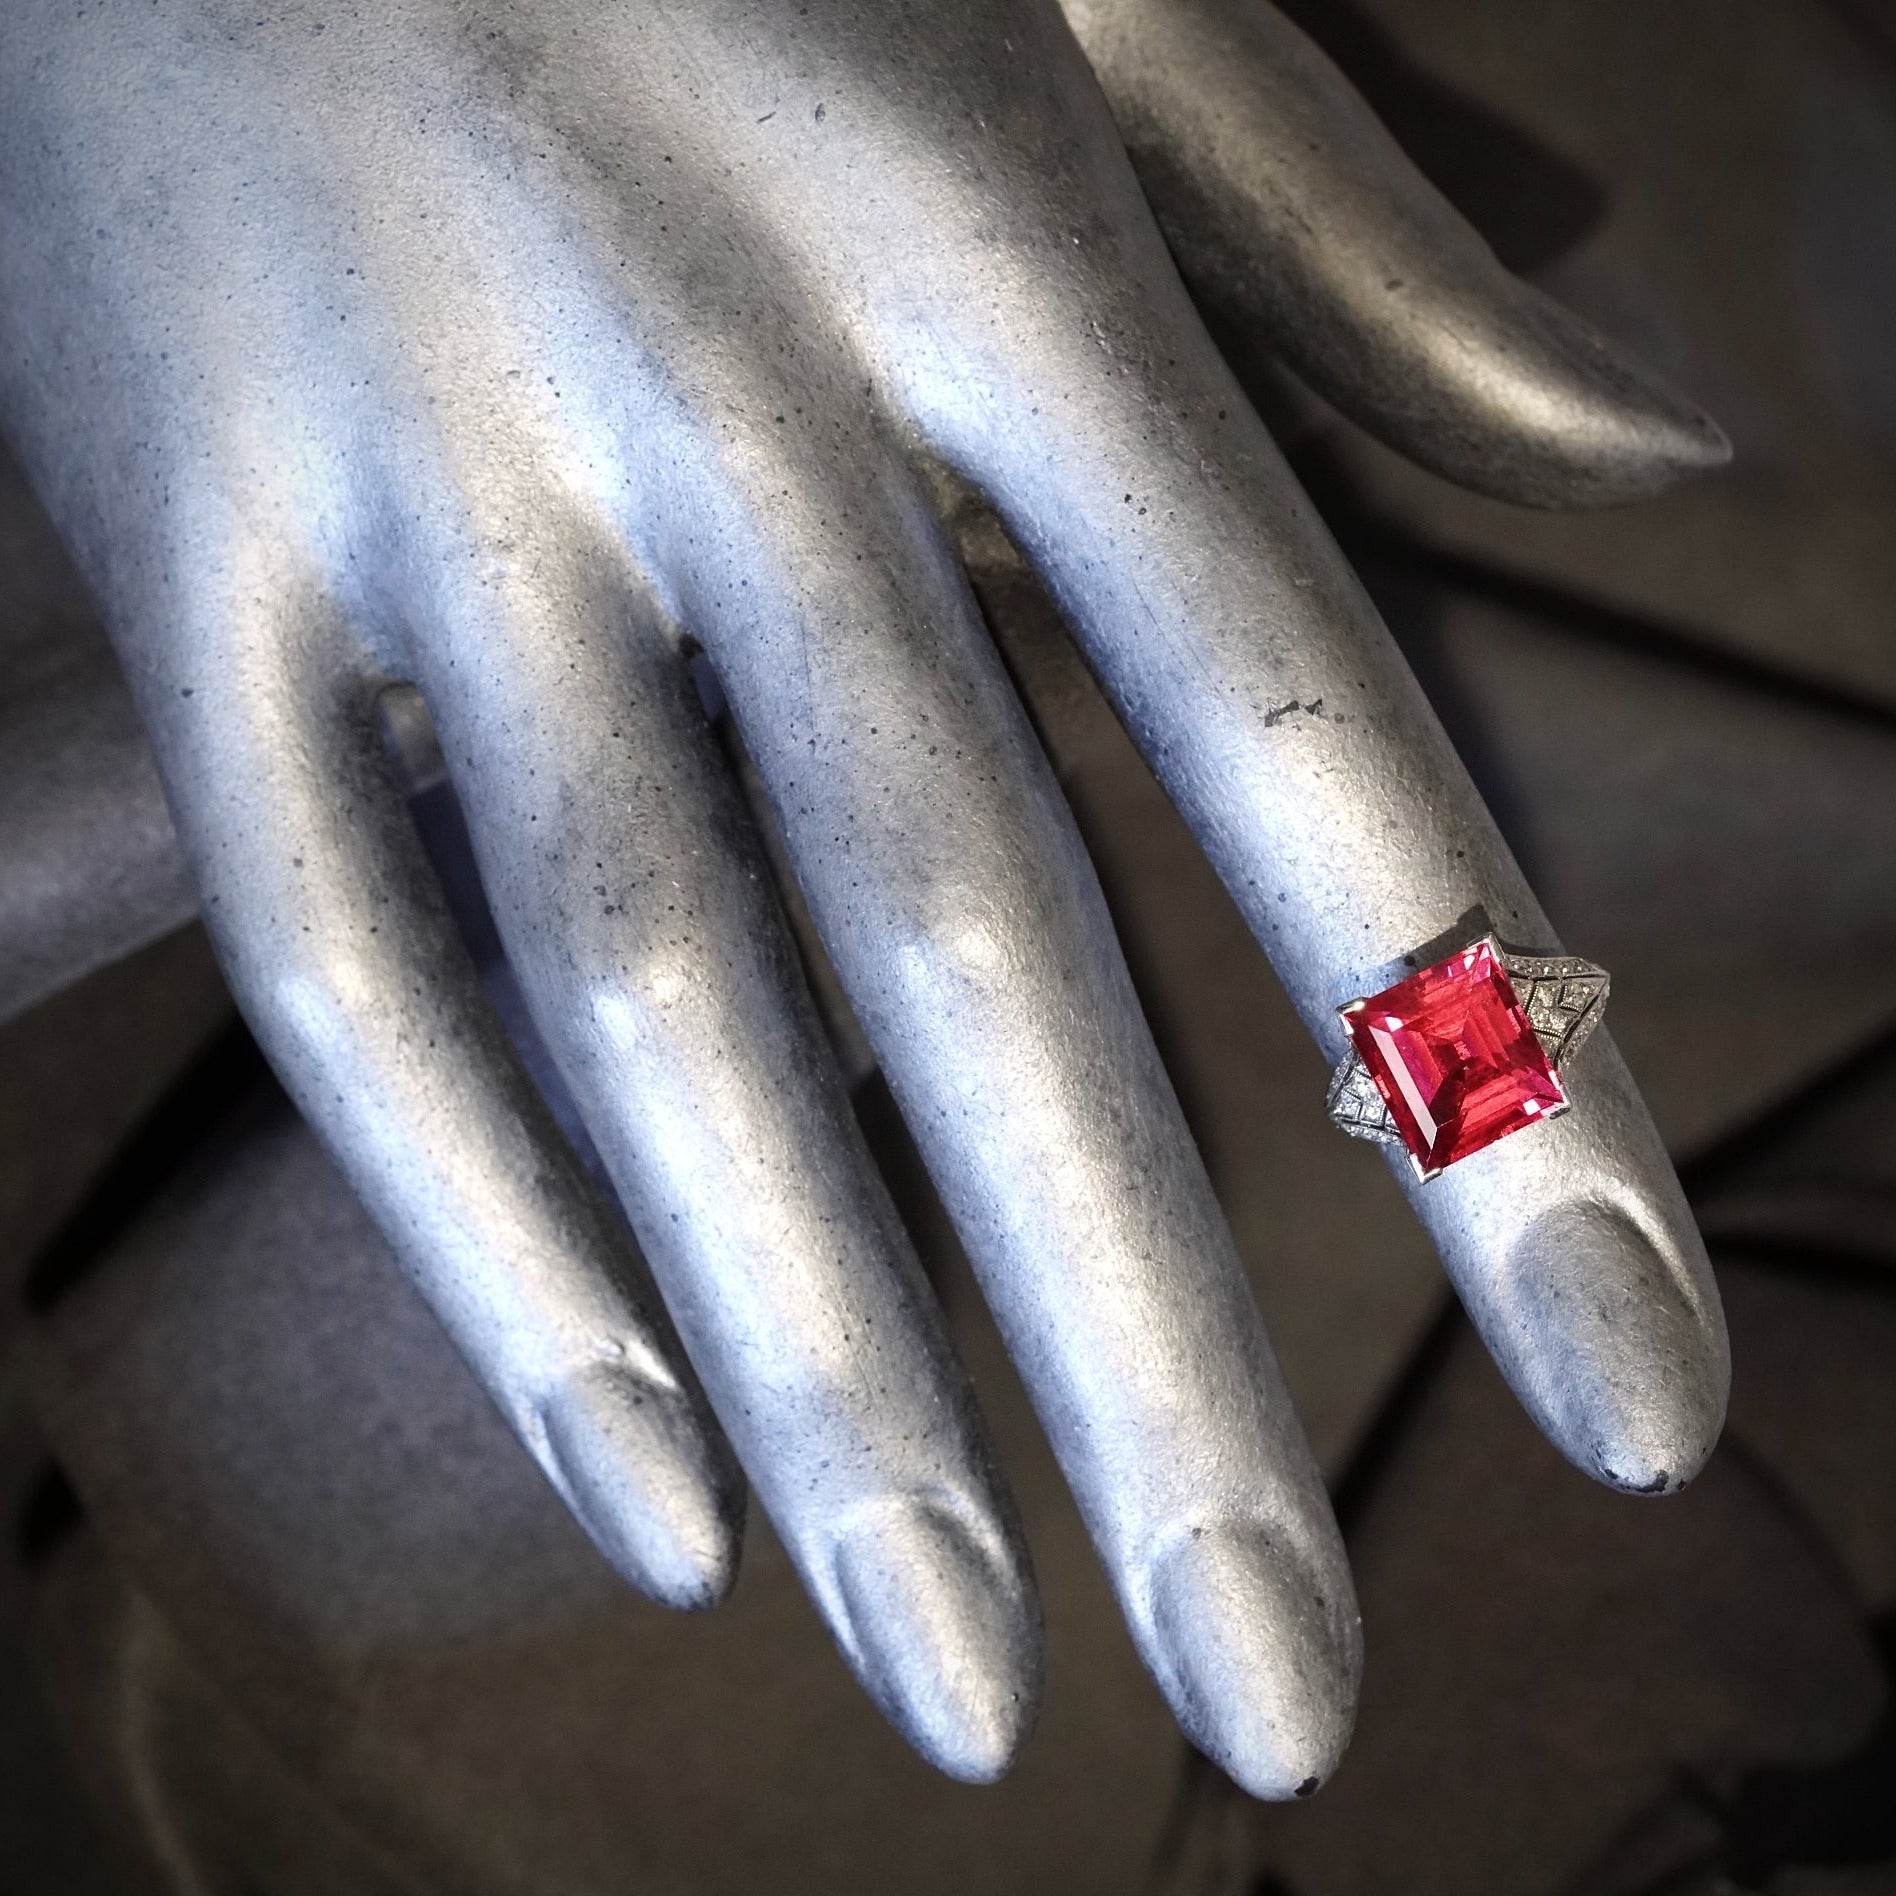 Late Edwardian 6.47-Carat Raspberry Wine Spinel and Diamond Ring in Platinum